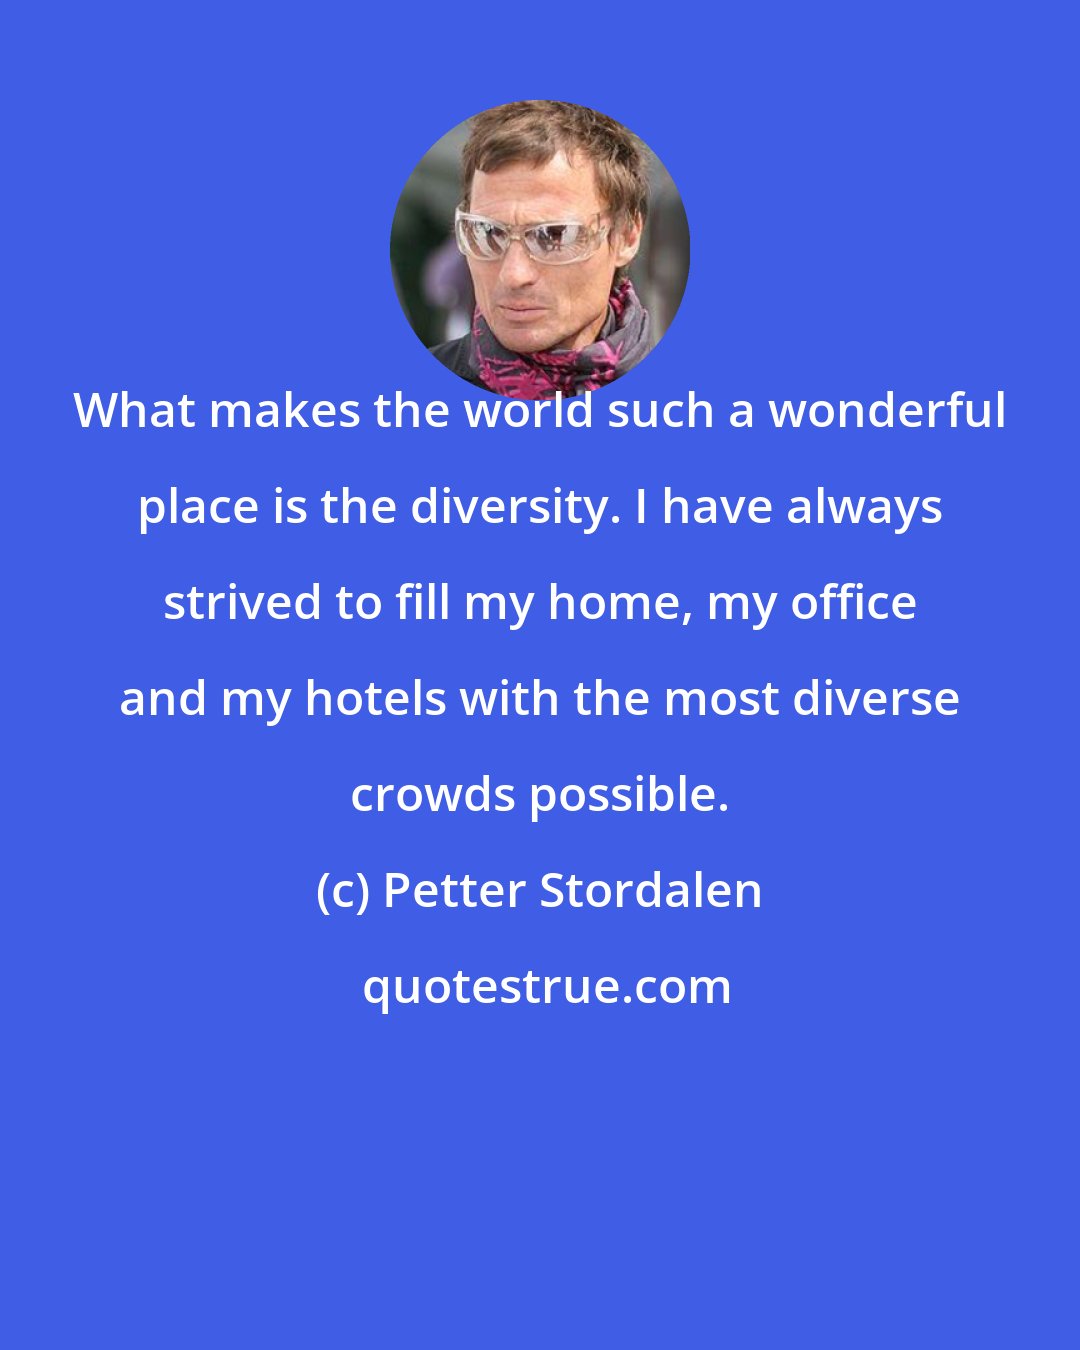 Petter Stordalen: What makes the world such a wonderful place is the diversity. I have always strived to fill my home, my office and my hotels with the most diverse crowds possible.